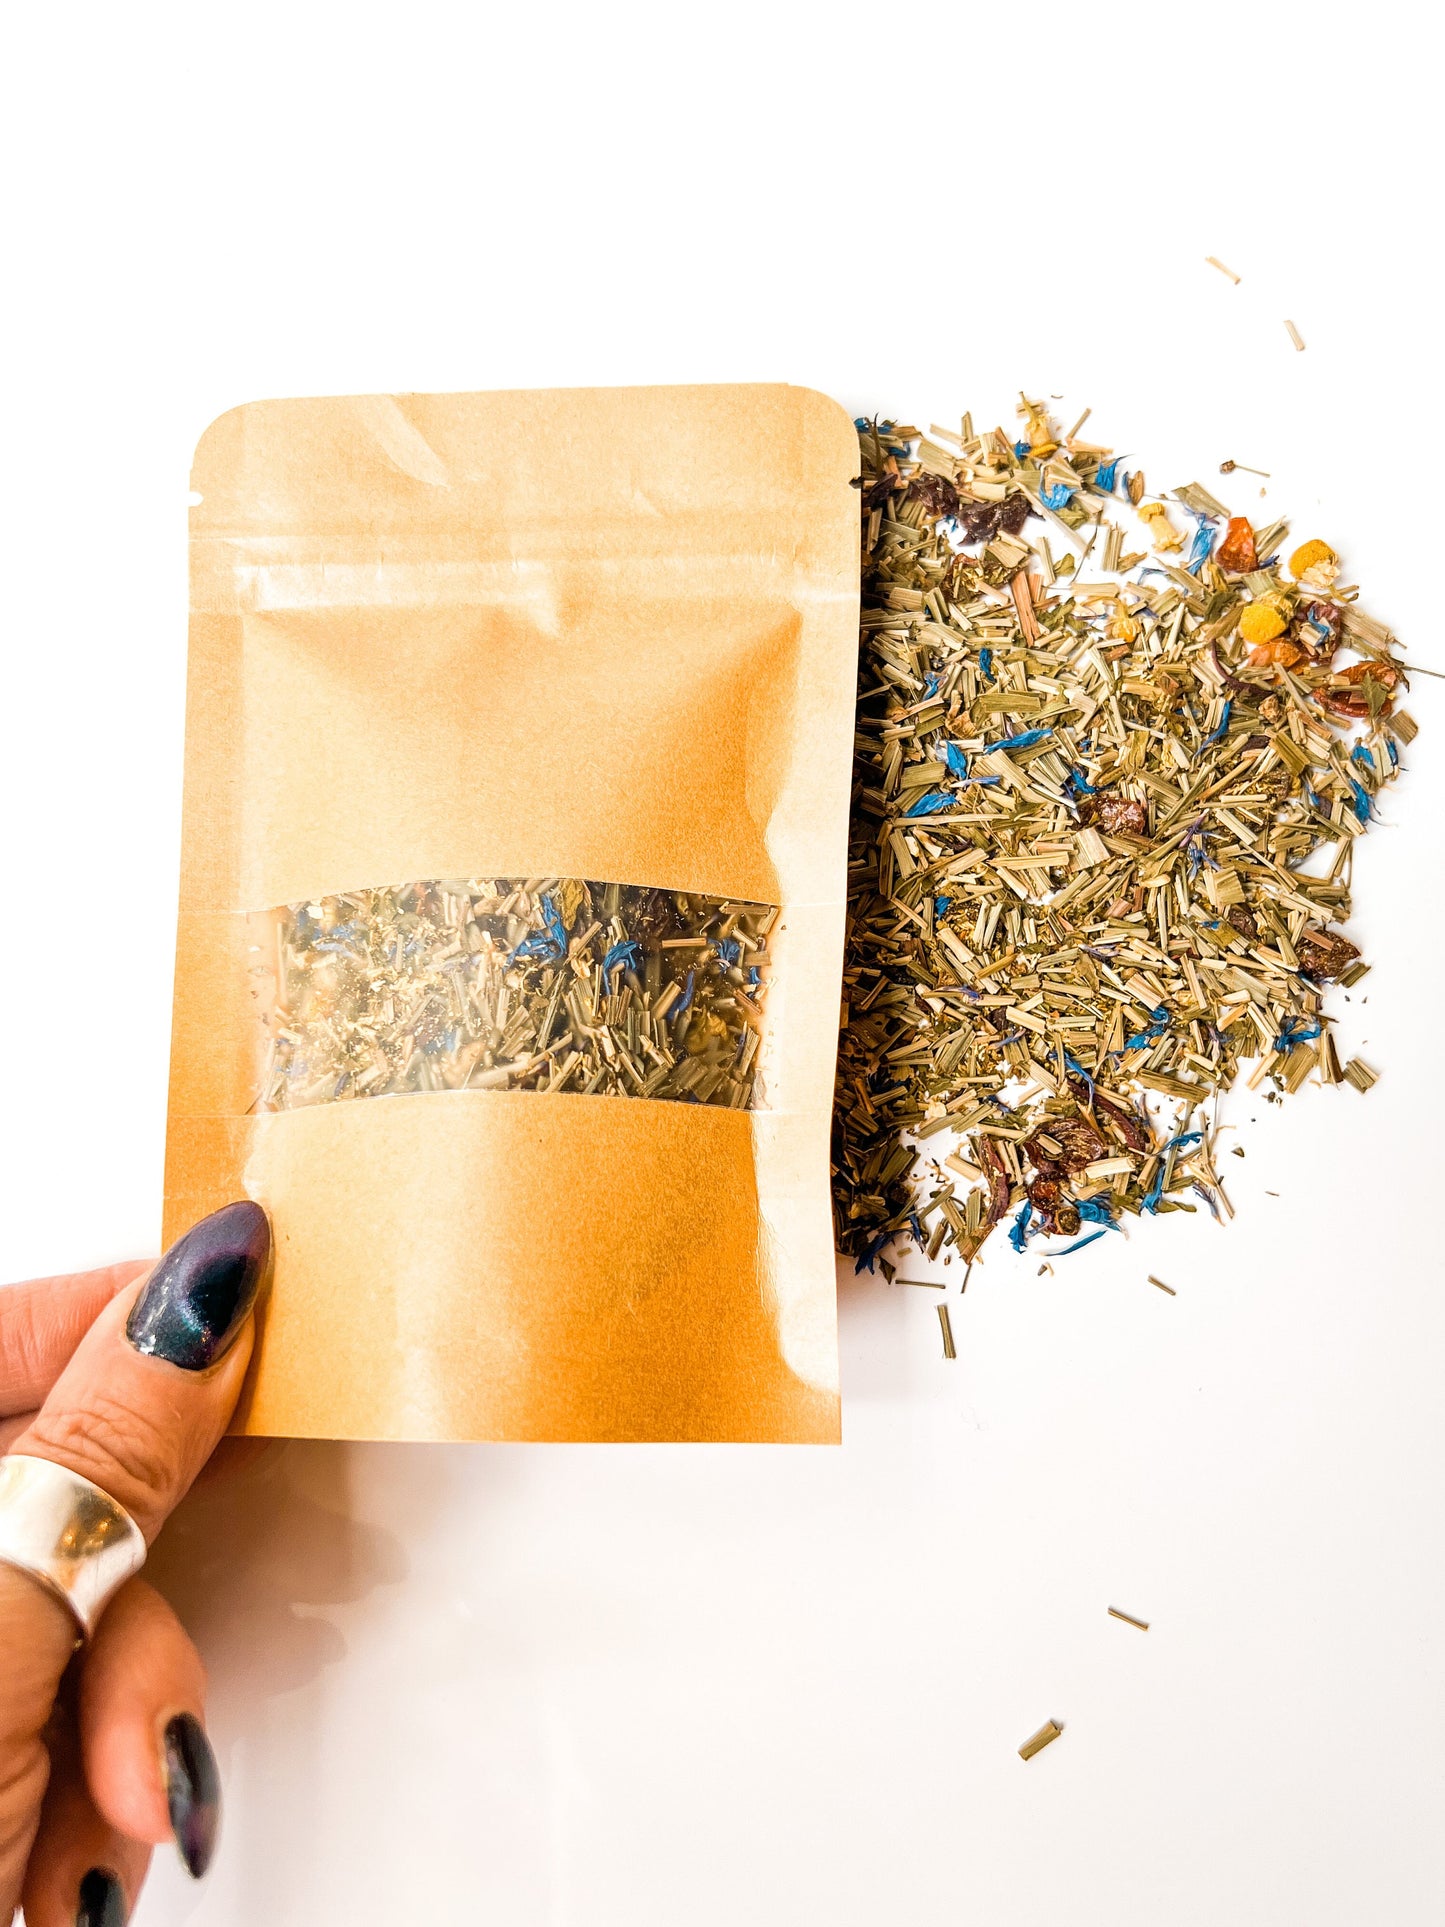 AnxieTea - Soothing and Calming Blend of Herbal Loose Leaf Tea with Valerian Root and Chamomile